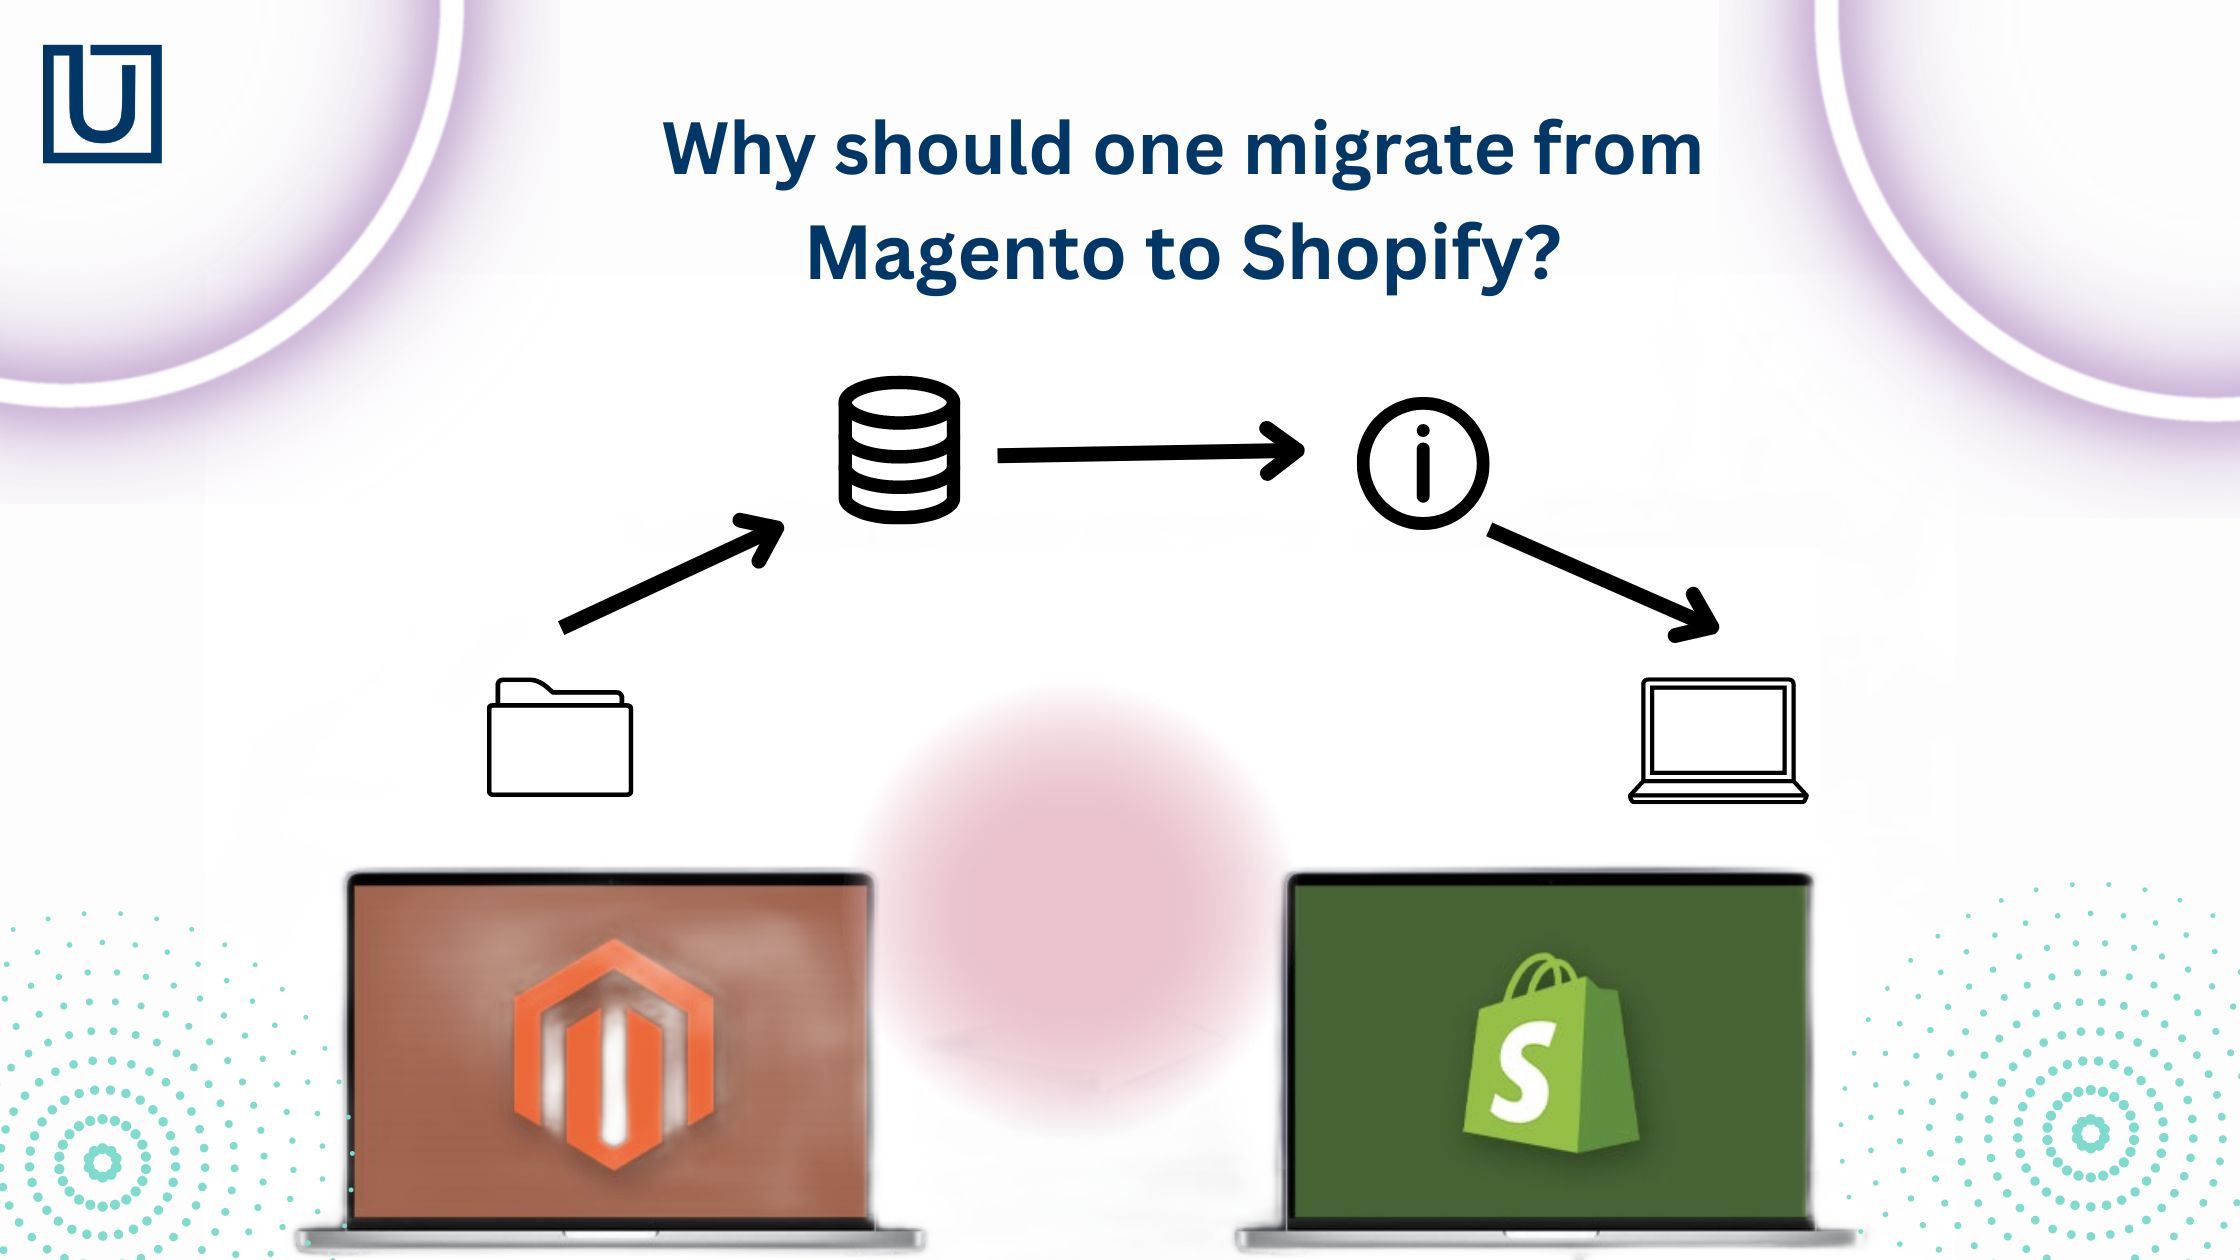 Why should one migrate from Magento to Shopify?